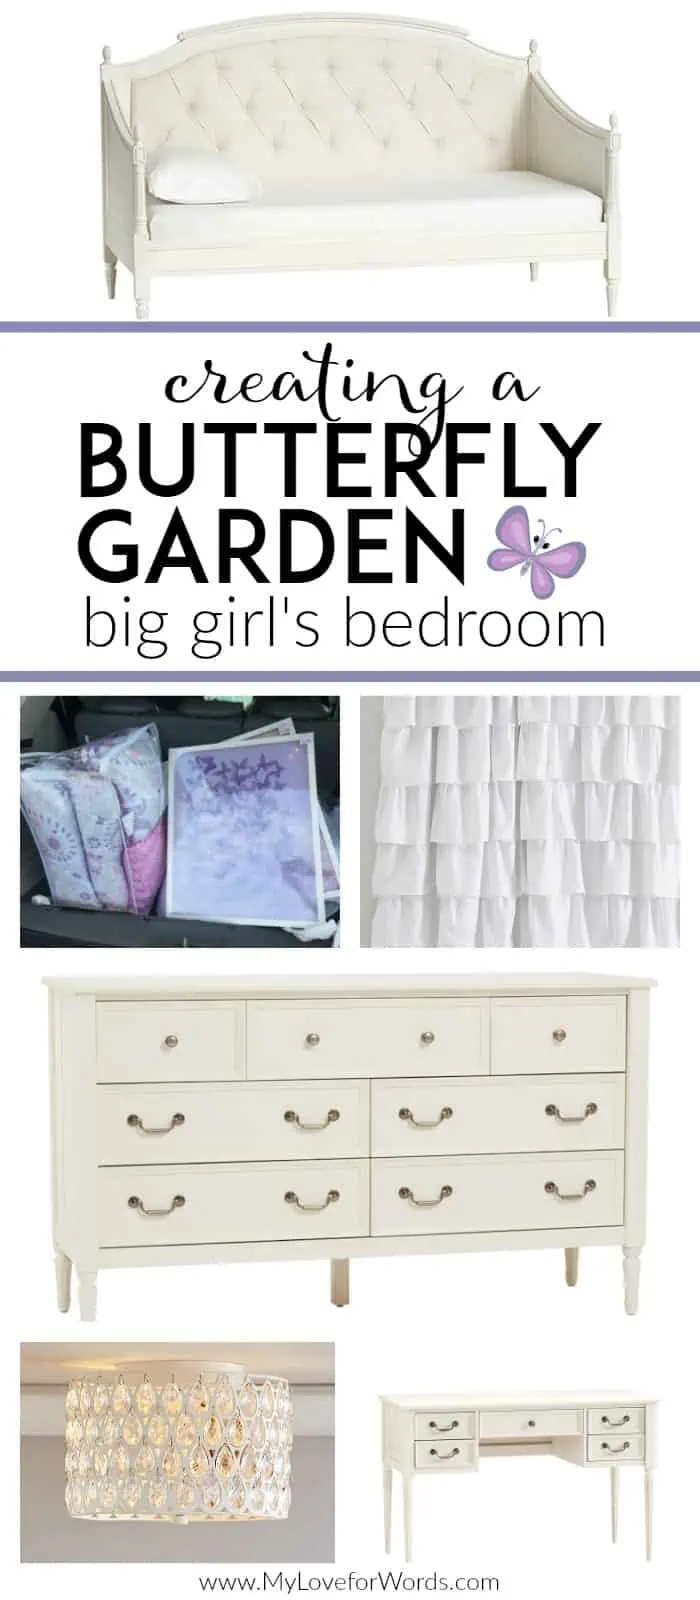 LOVE these ideas for creating a cohesive theme and functional layout for a a big girl bedroom. Adorable room makeover ideas for incorporating storage in an awkward room. The pink and purple bedding, beautiful daybed, and whimsical theme are going to make this one impressive diy transformation!